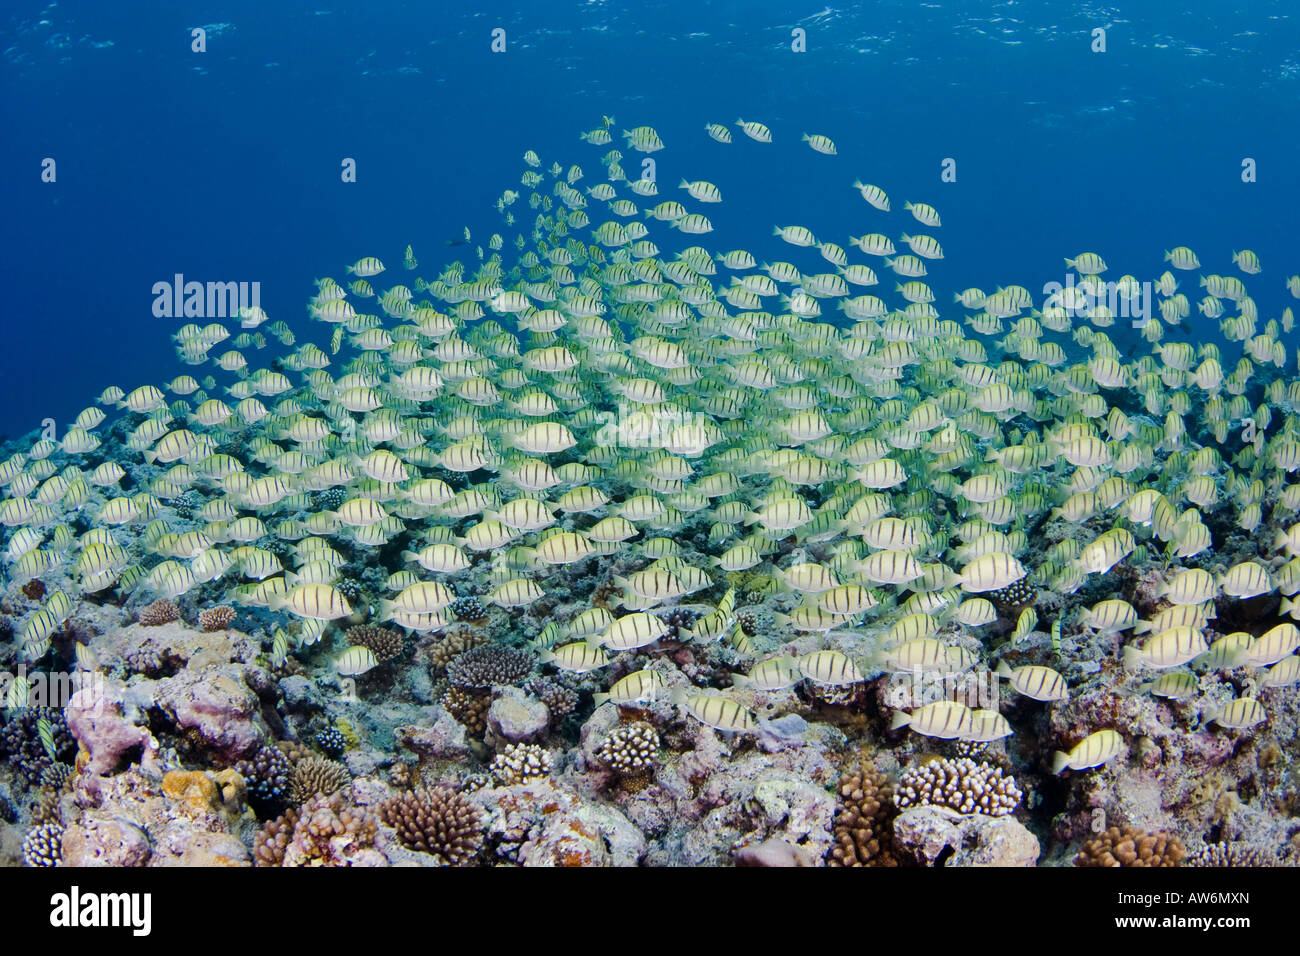 Schooling convict surgeonfish, Acanthurus triostegus, also known as convict tangs, Yap, Micronesia. Stock Photo